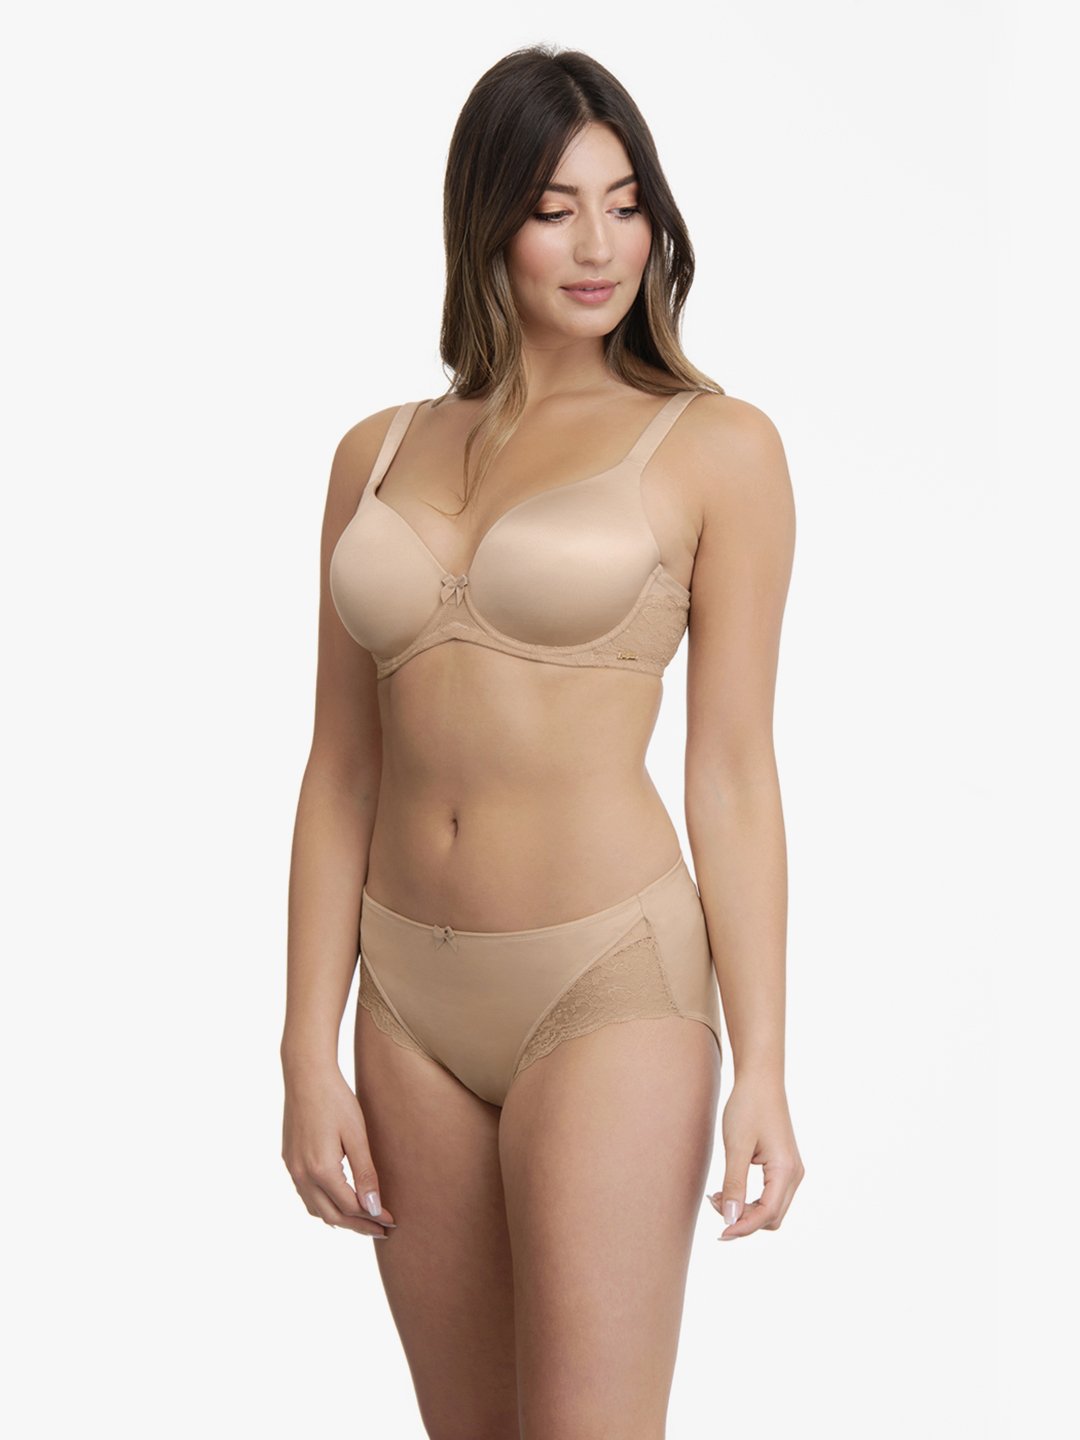 Ultimo Delicate Romance Low Rise Hipster - Sesame